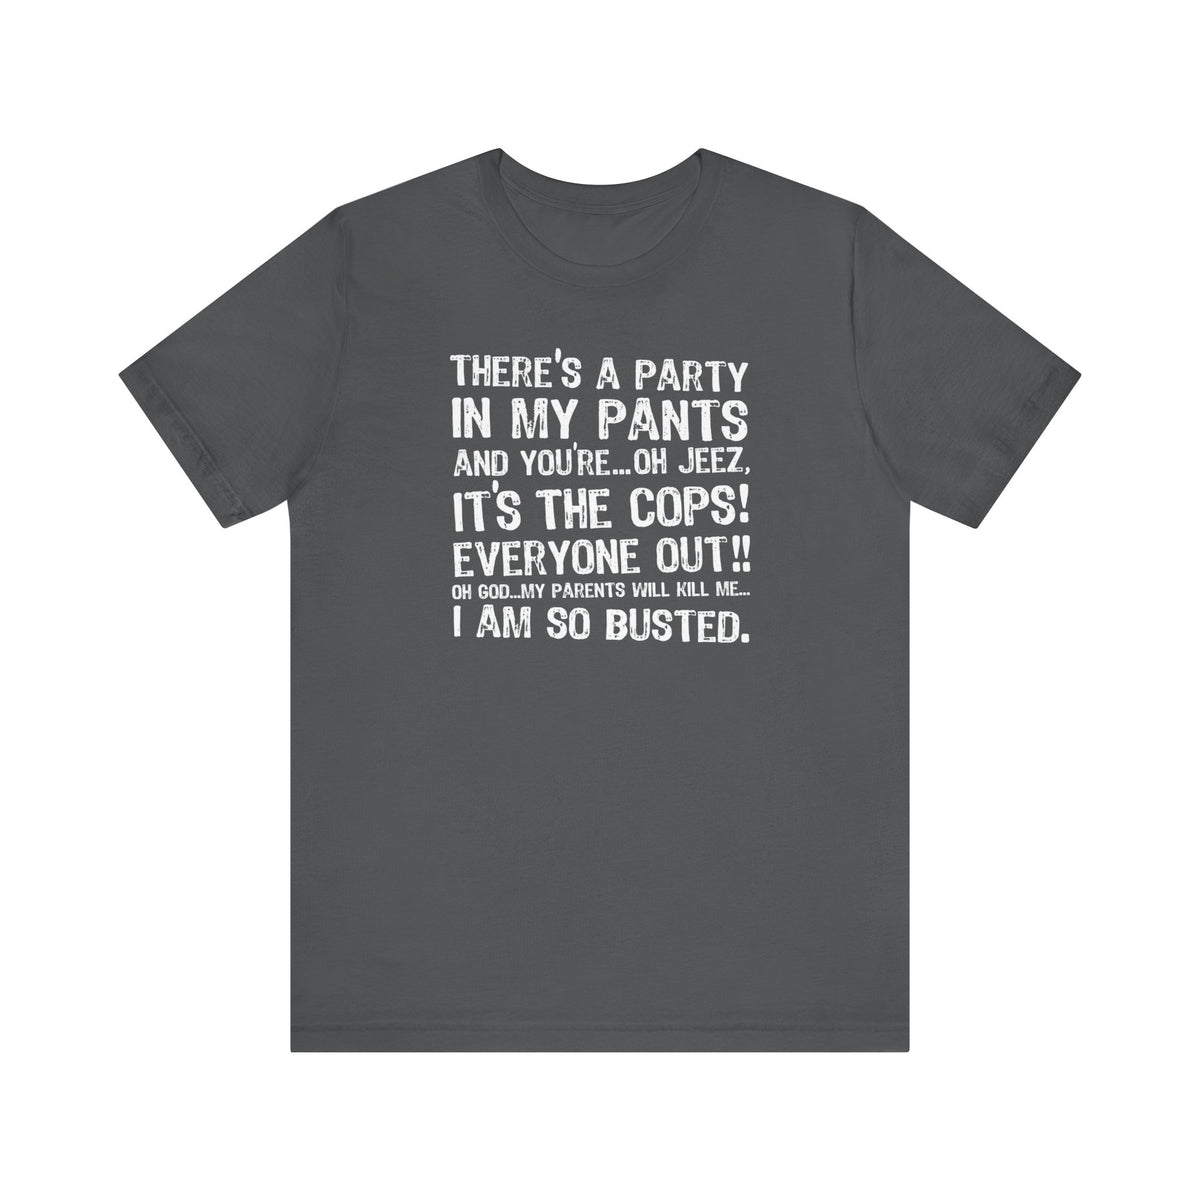 There's A Party In My Pants And You're... Oh Jeez It's The Cops! - Men's T-Shirt